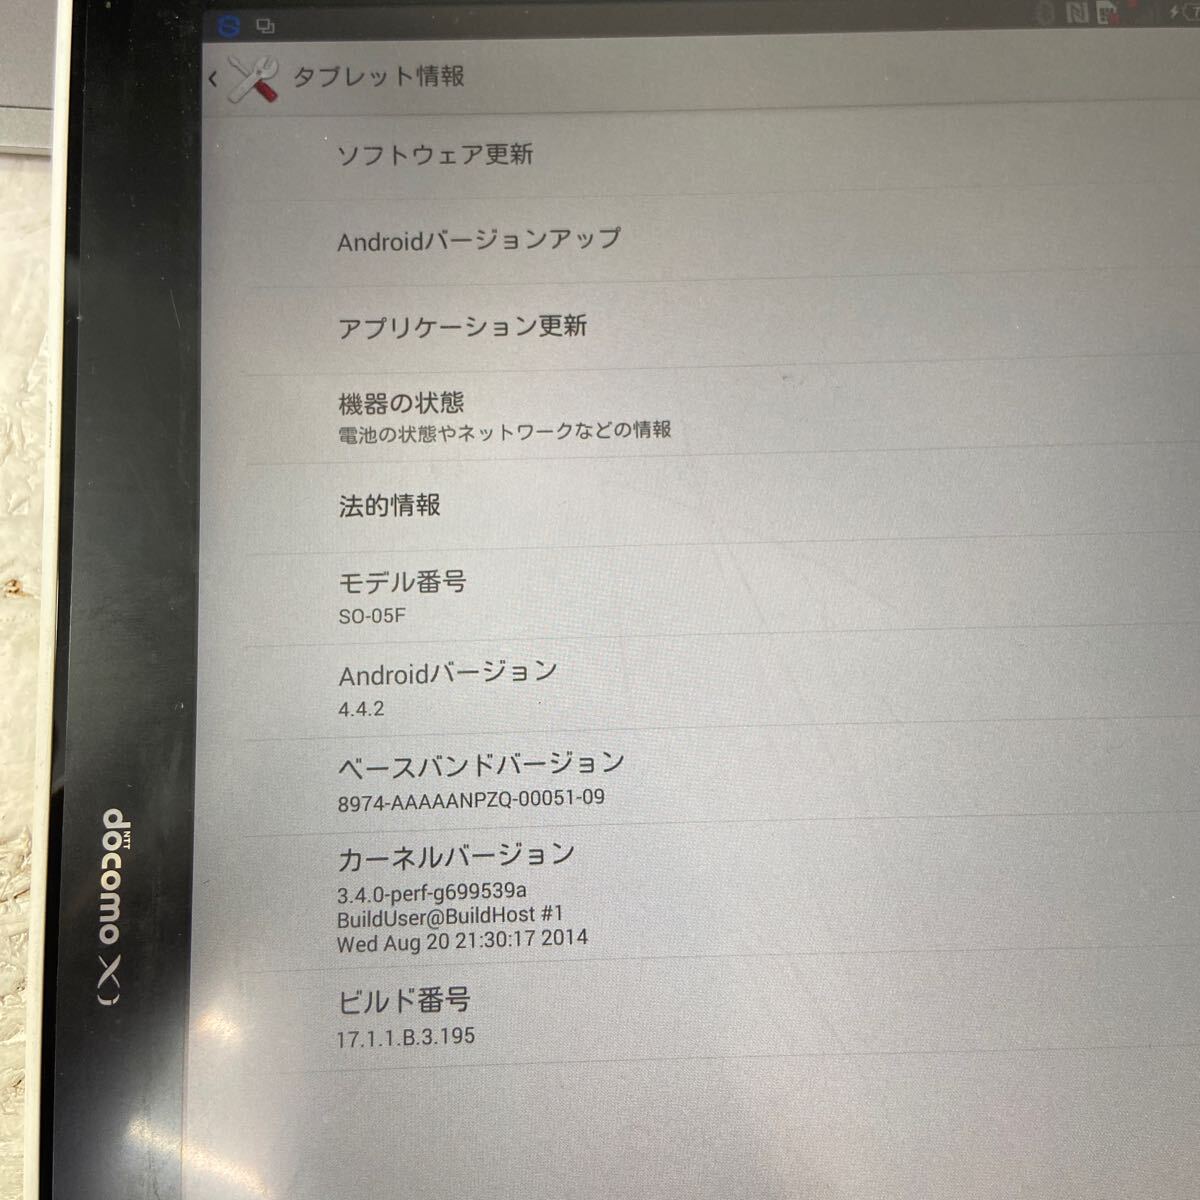 8 SONY ソニー XPERIA Z2 タブレット SO-05F 判定◯ 初期化済み Xperia Tablet タブレット_画像4